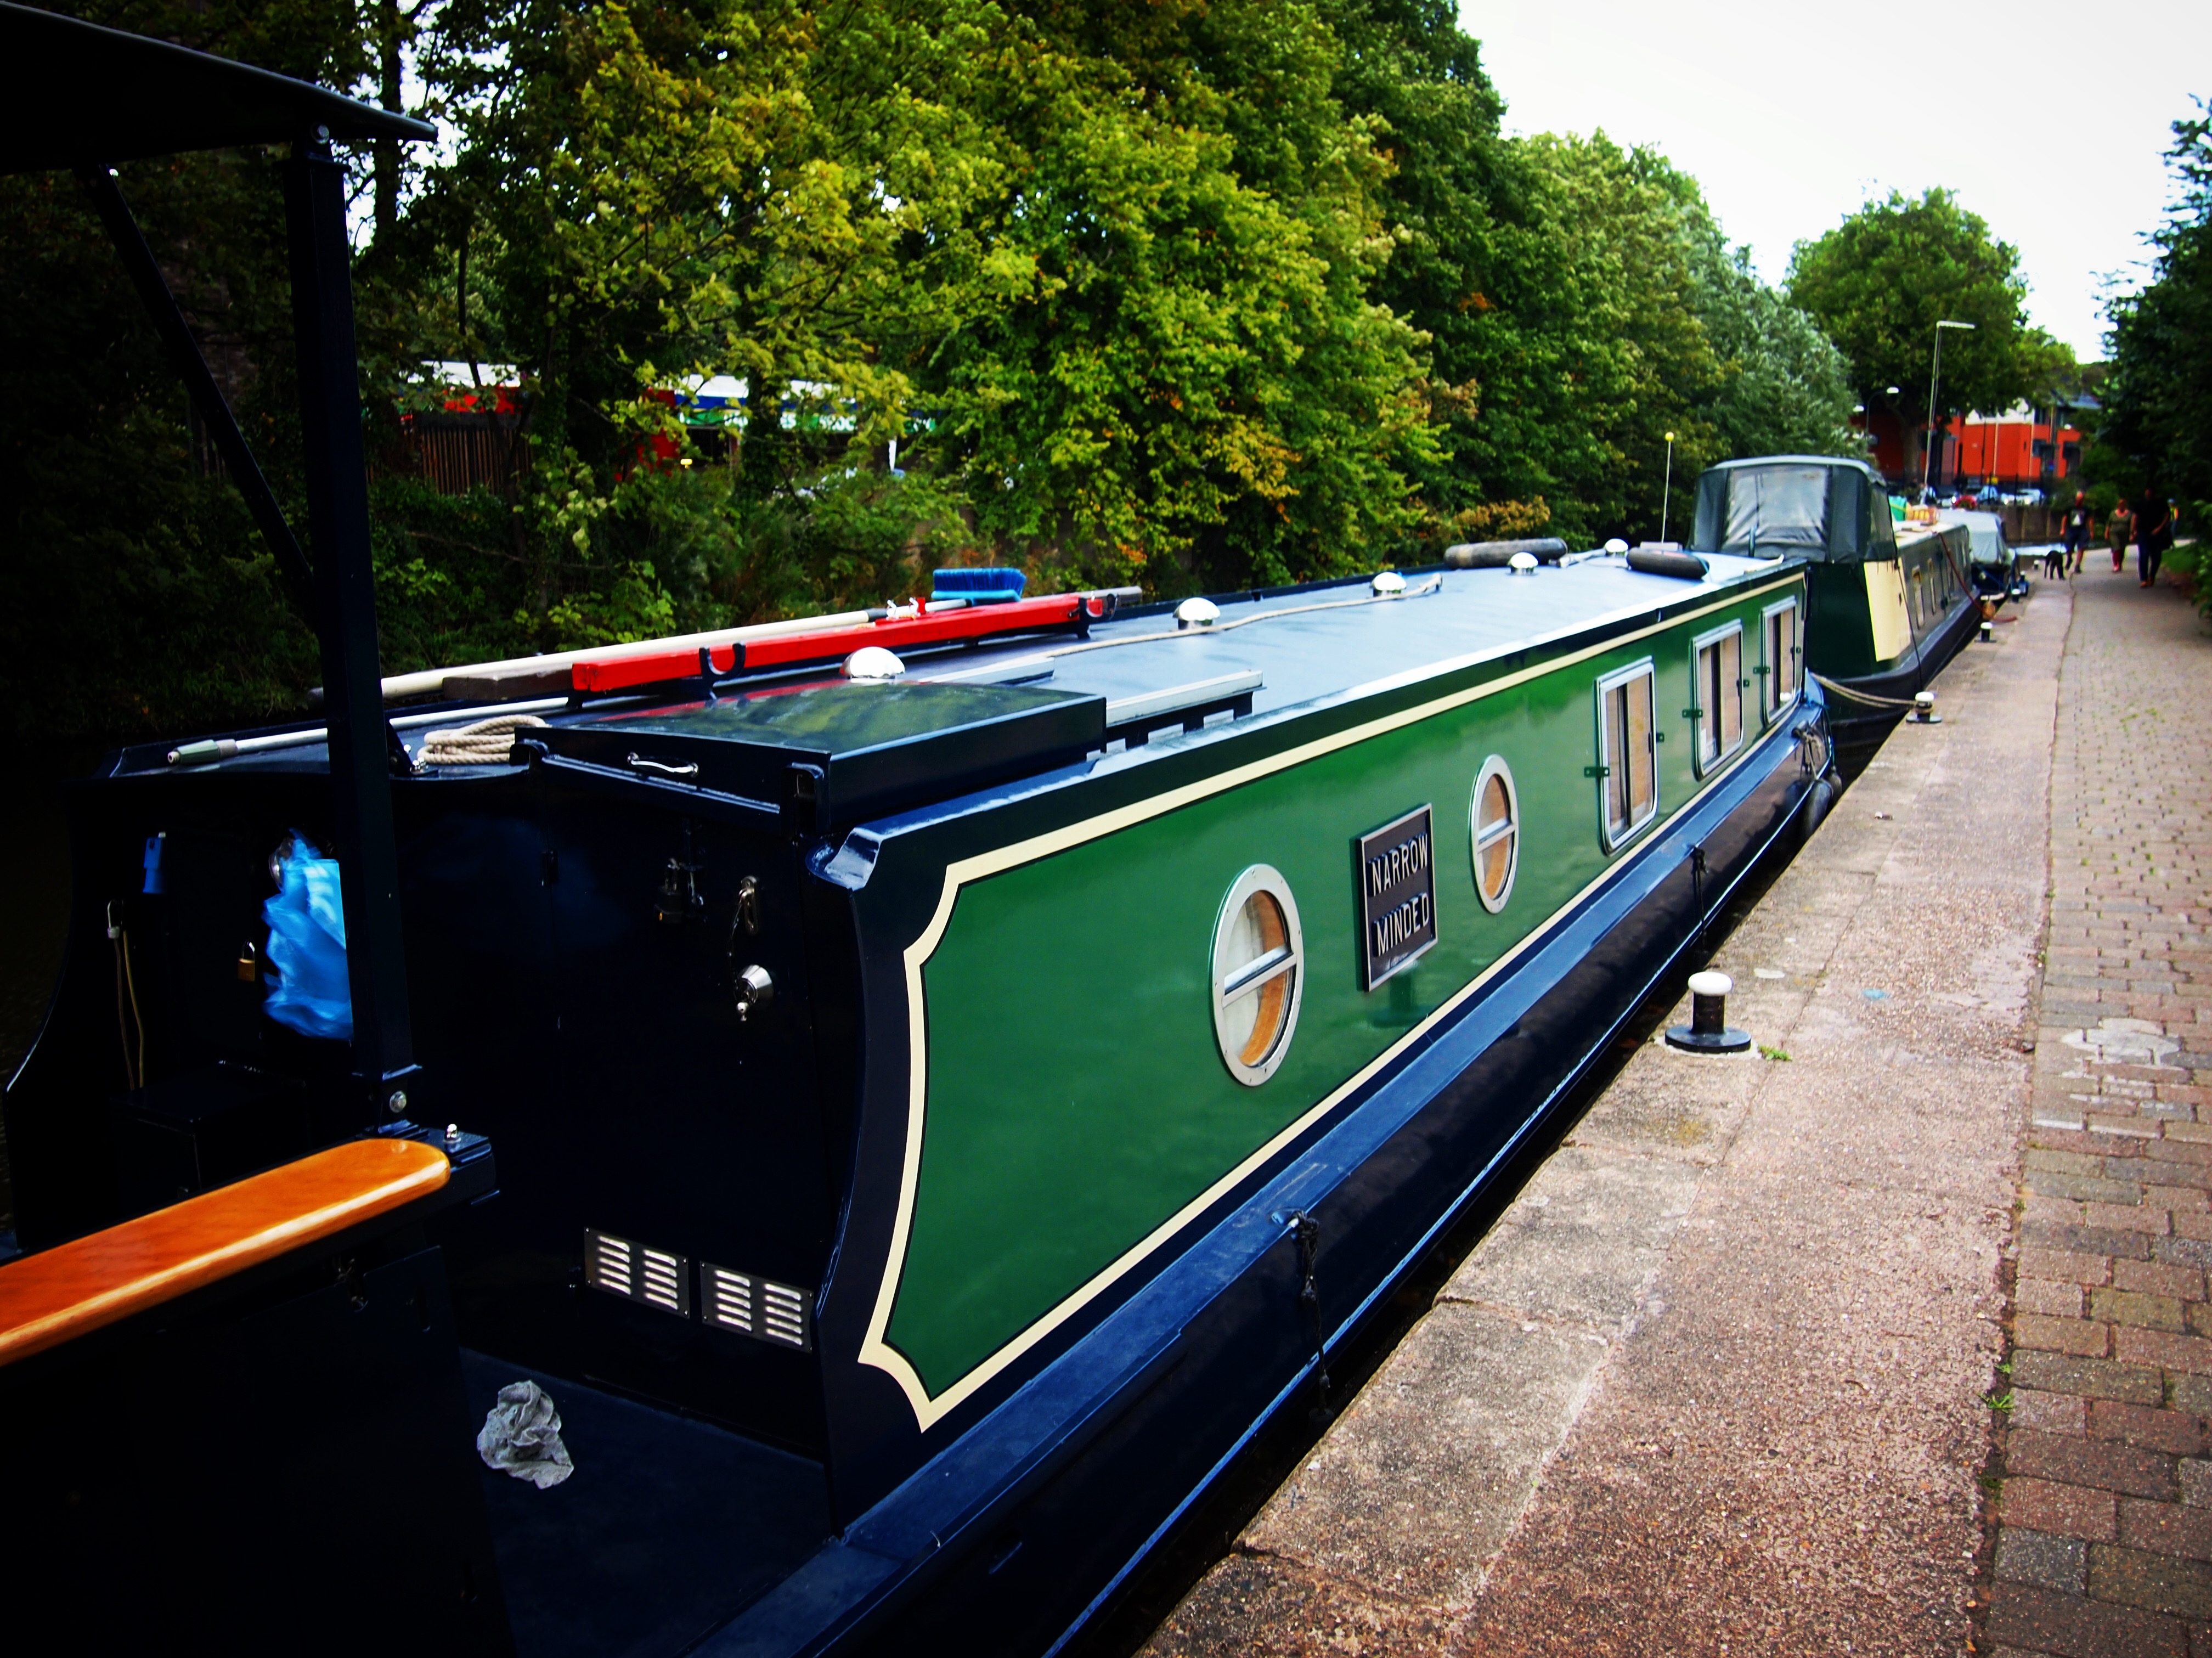 Along the Nottingham Canal [Photo]